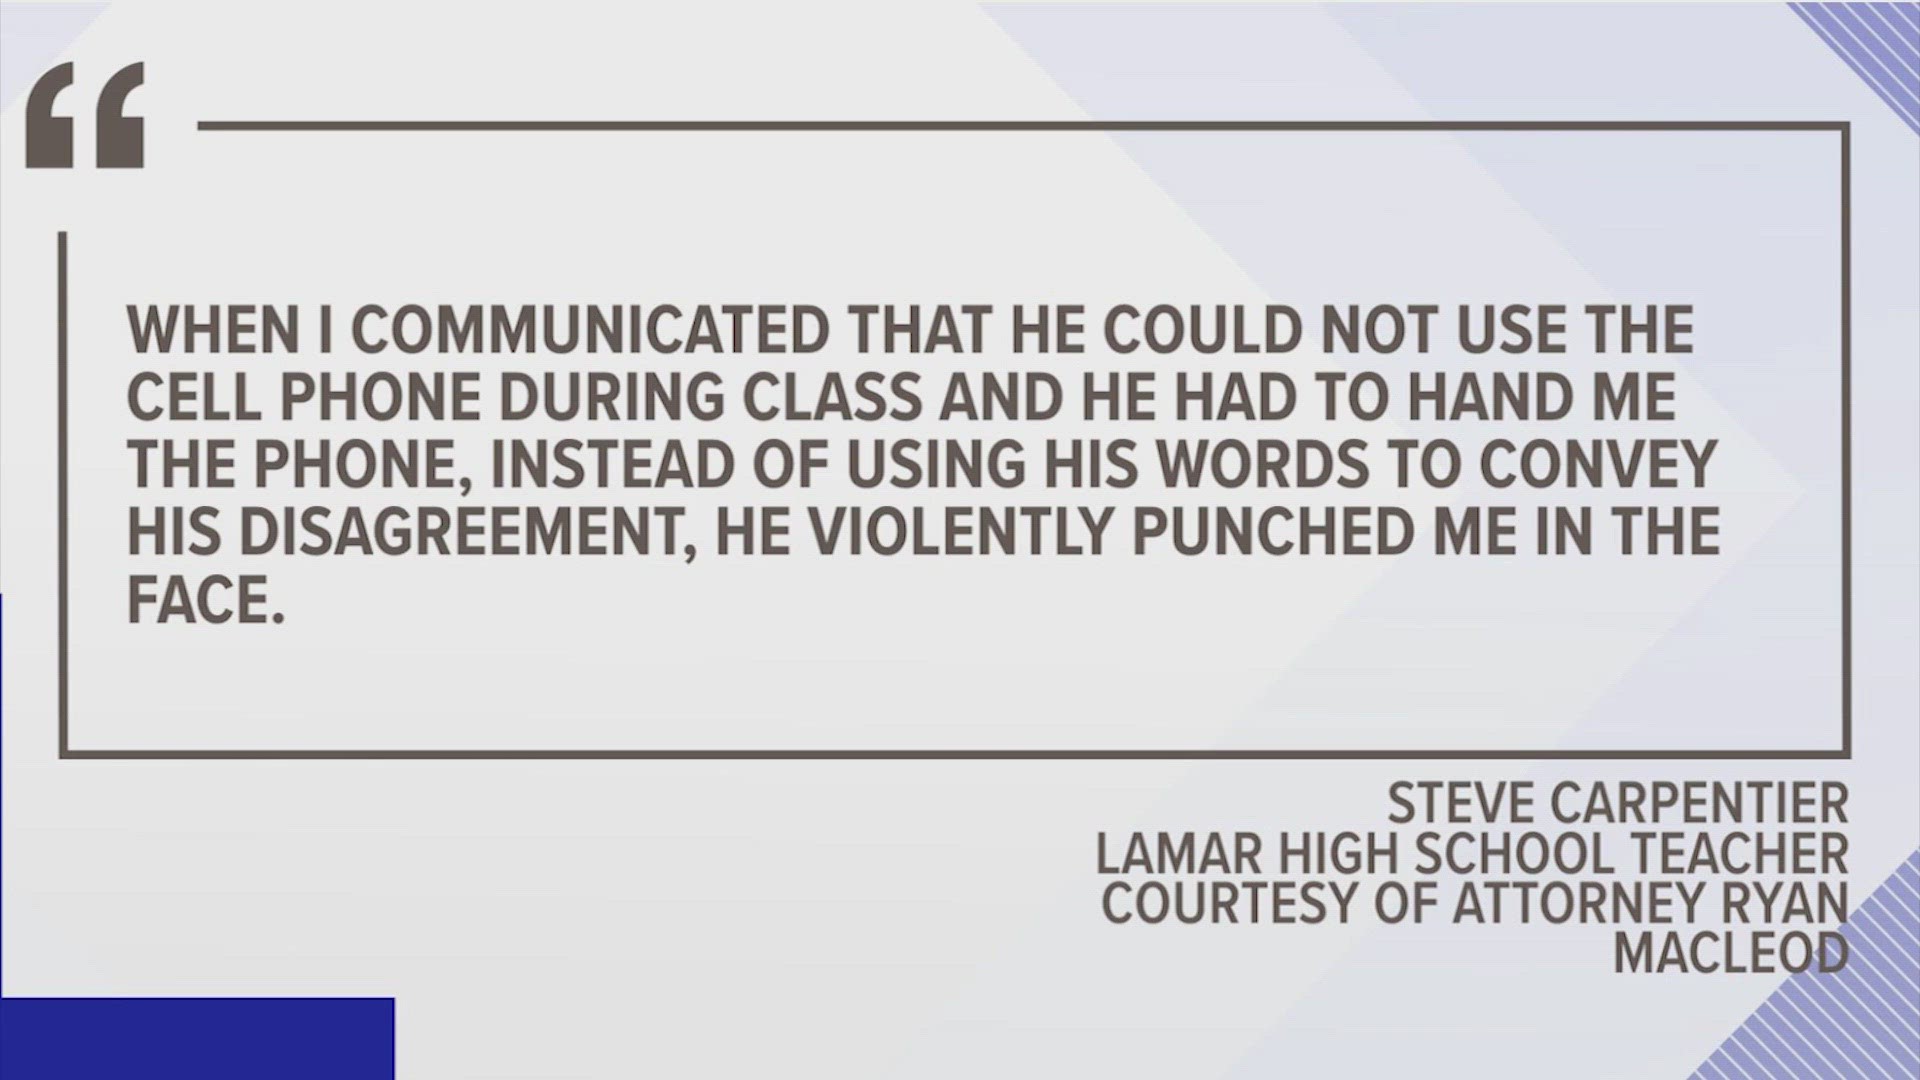 After video of a Lamar High School student punching a teacher surfaced last week, the teacher said it won't deter him from returning to the classroom.